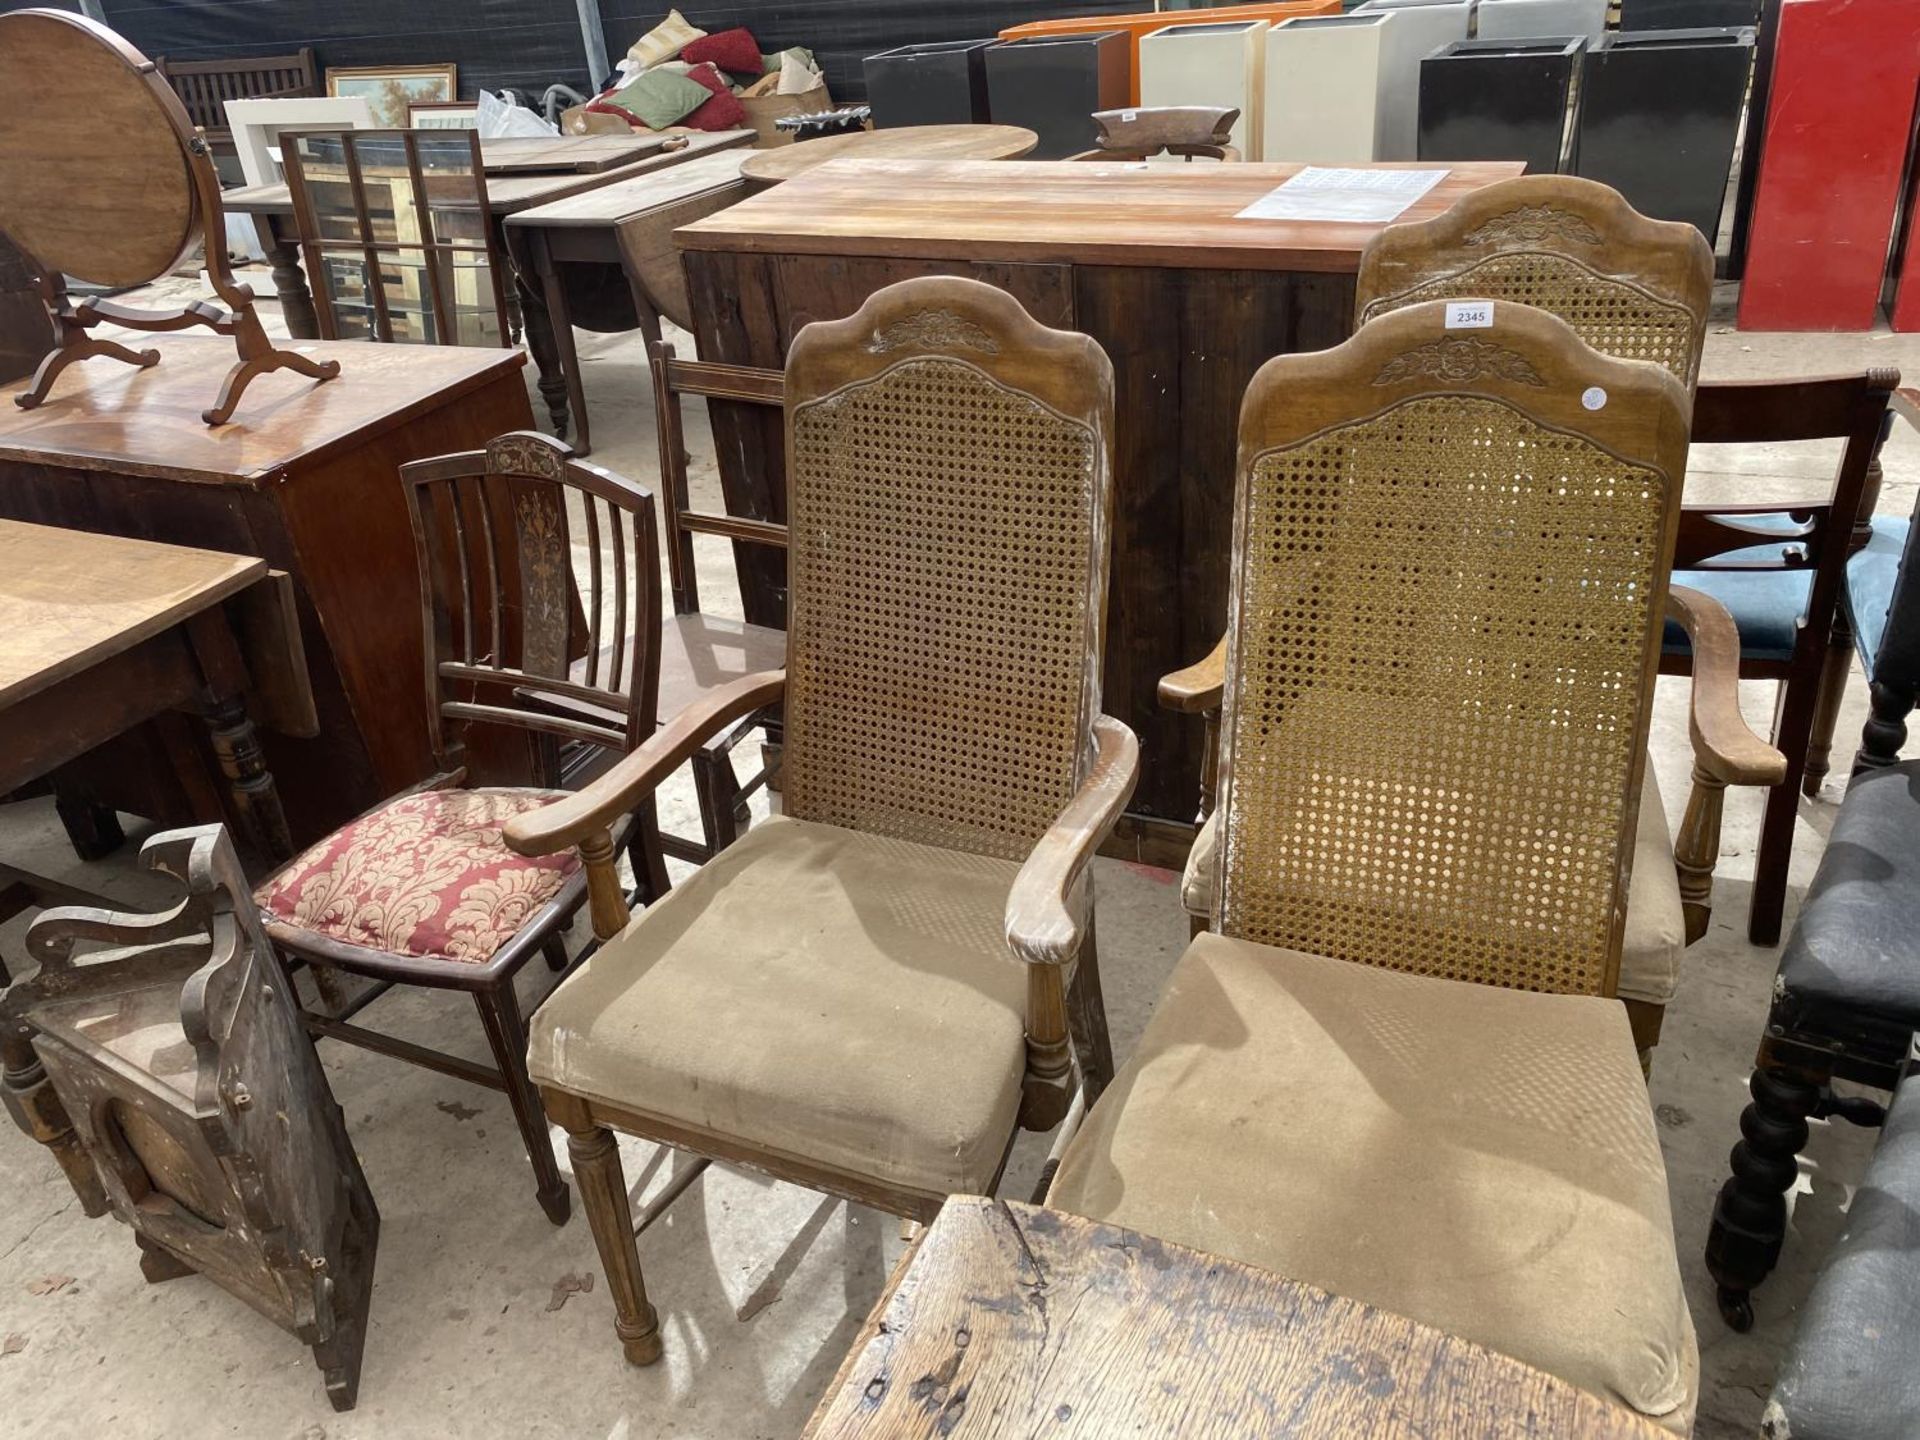 TWO EDWARDIAN BEDROOM CHAIRS, THREE CANE-BACK DINING CHAIRS AND A VICTORIAN CORNER STAND